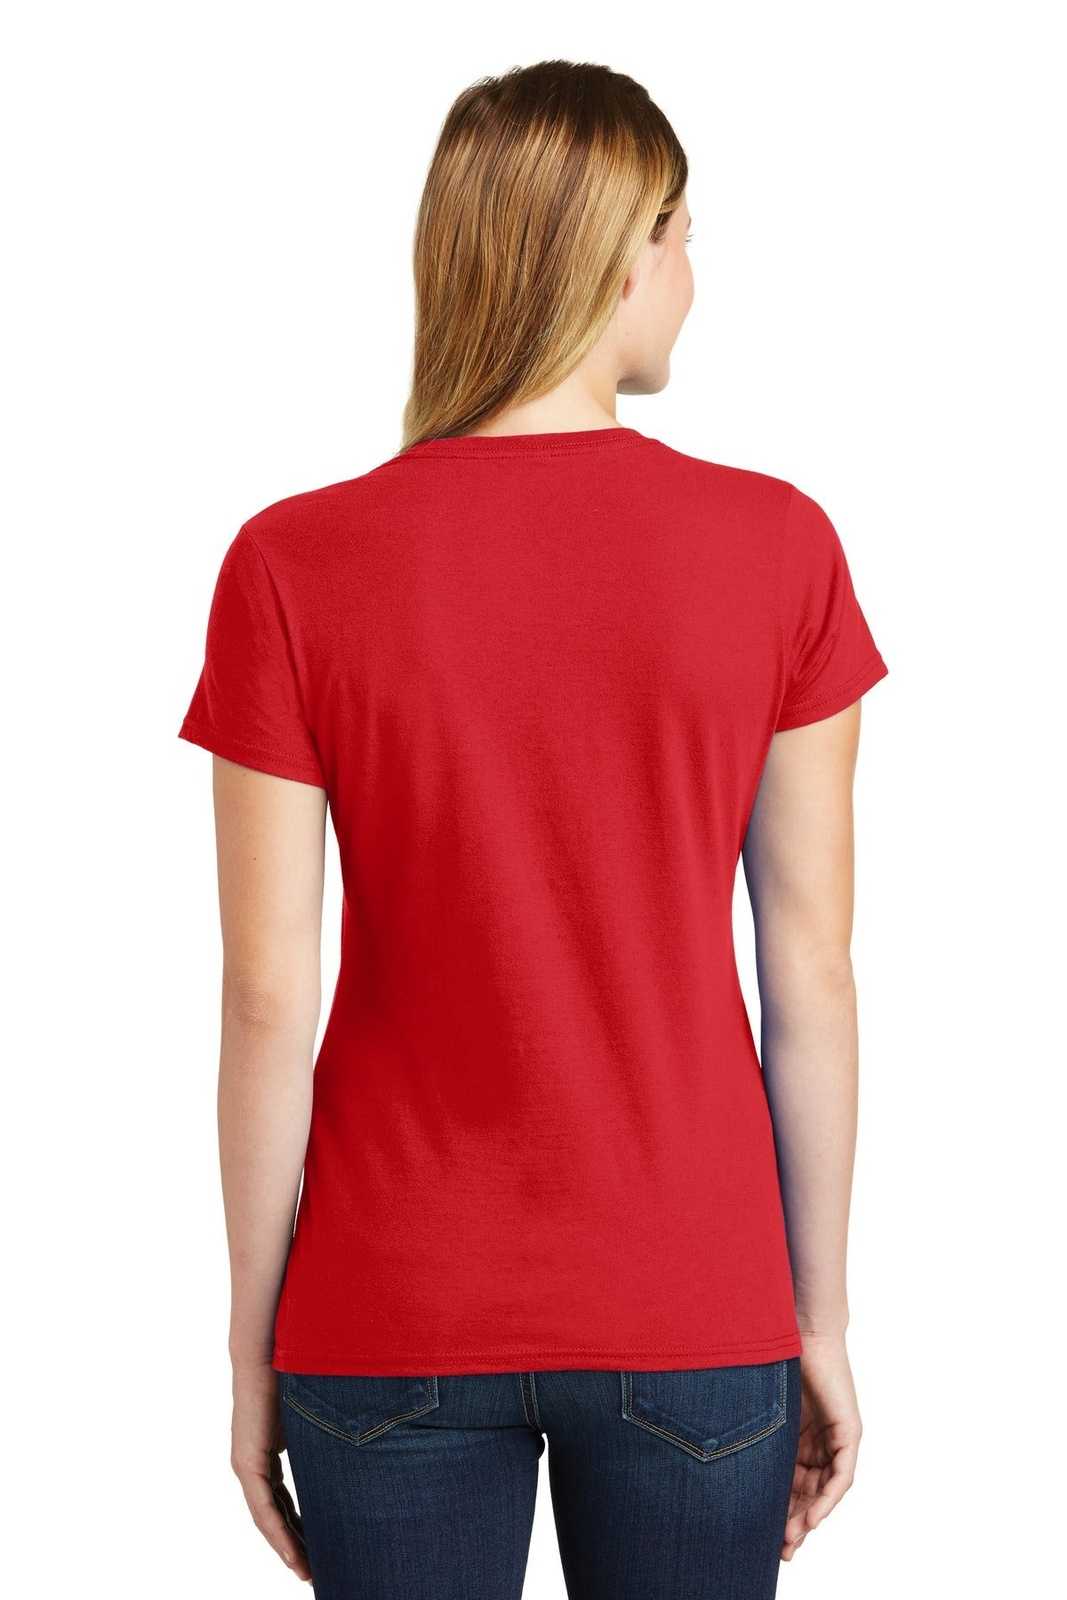 Port & Company LPC450 Ladies Fan Favorite Tee - Bright Red - HIT a Double - 1